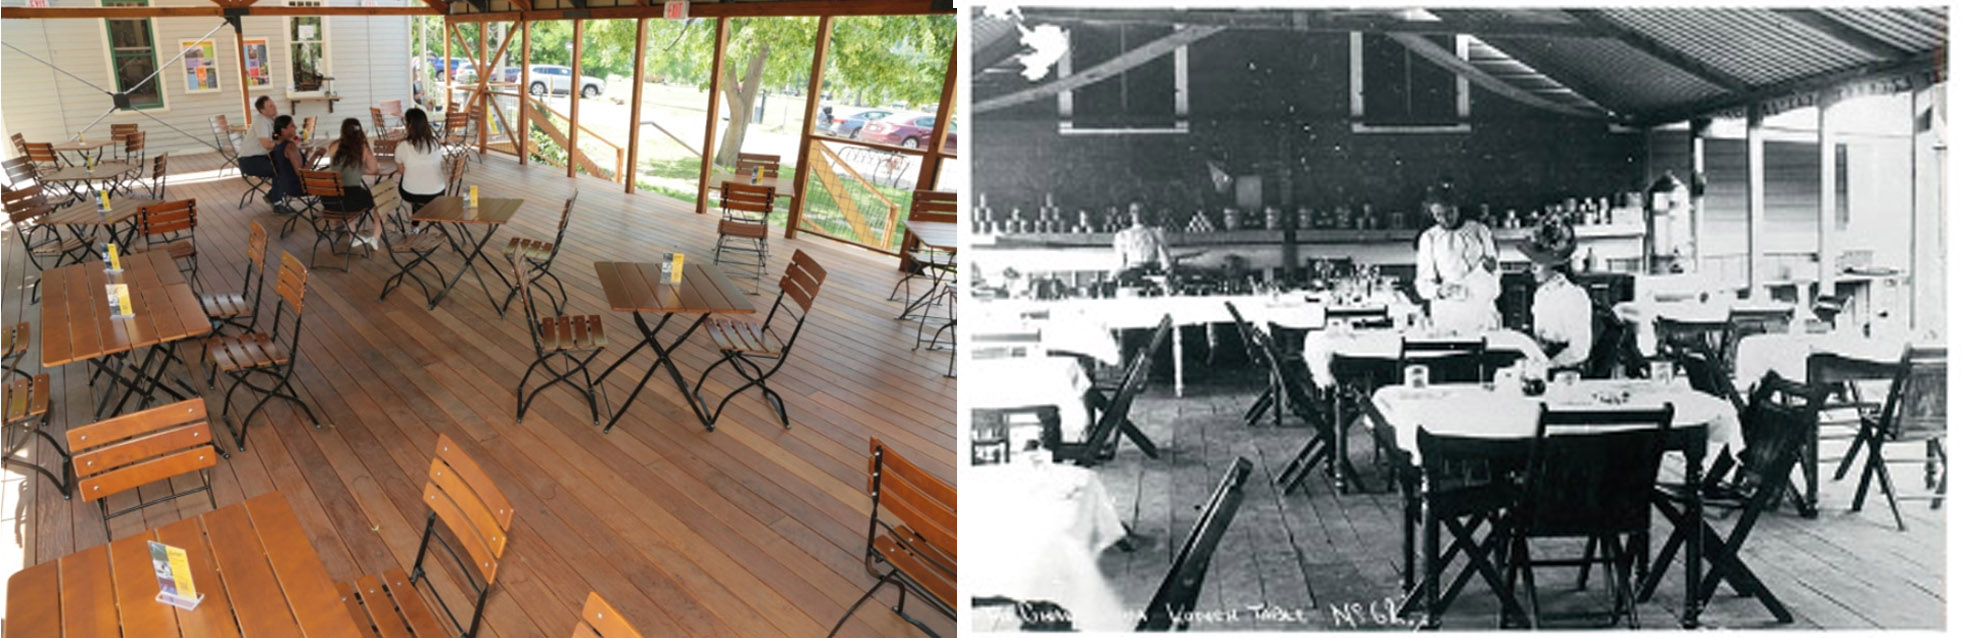 Chautauqua Cafe dining area before and after photo